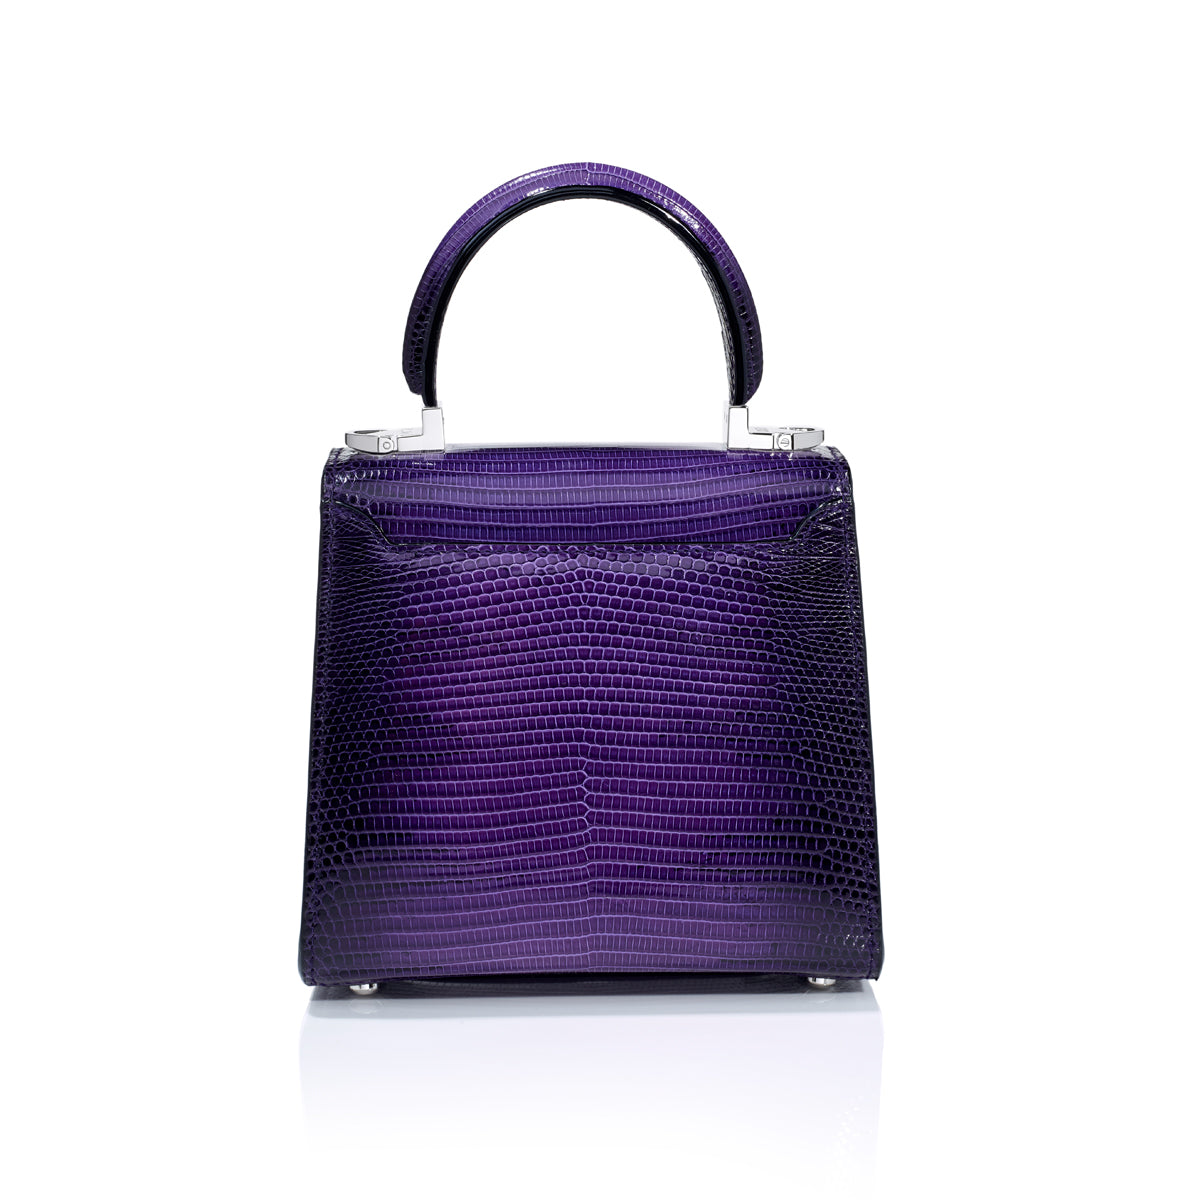 STALVEY Trapezoid 1.55 Mini in Purple Ombre Lizard with Palladium Hardware Front View